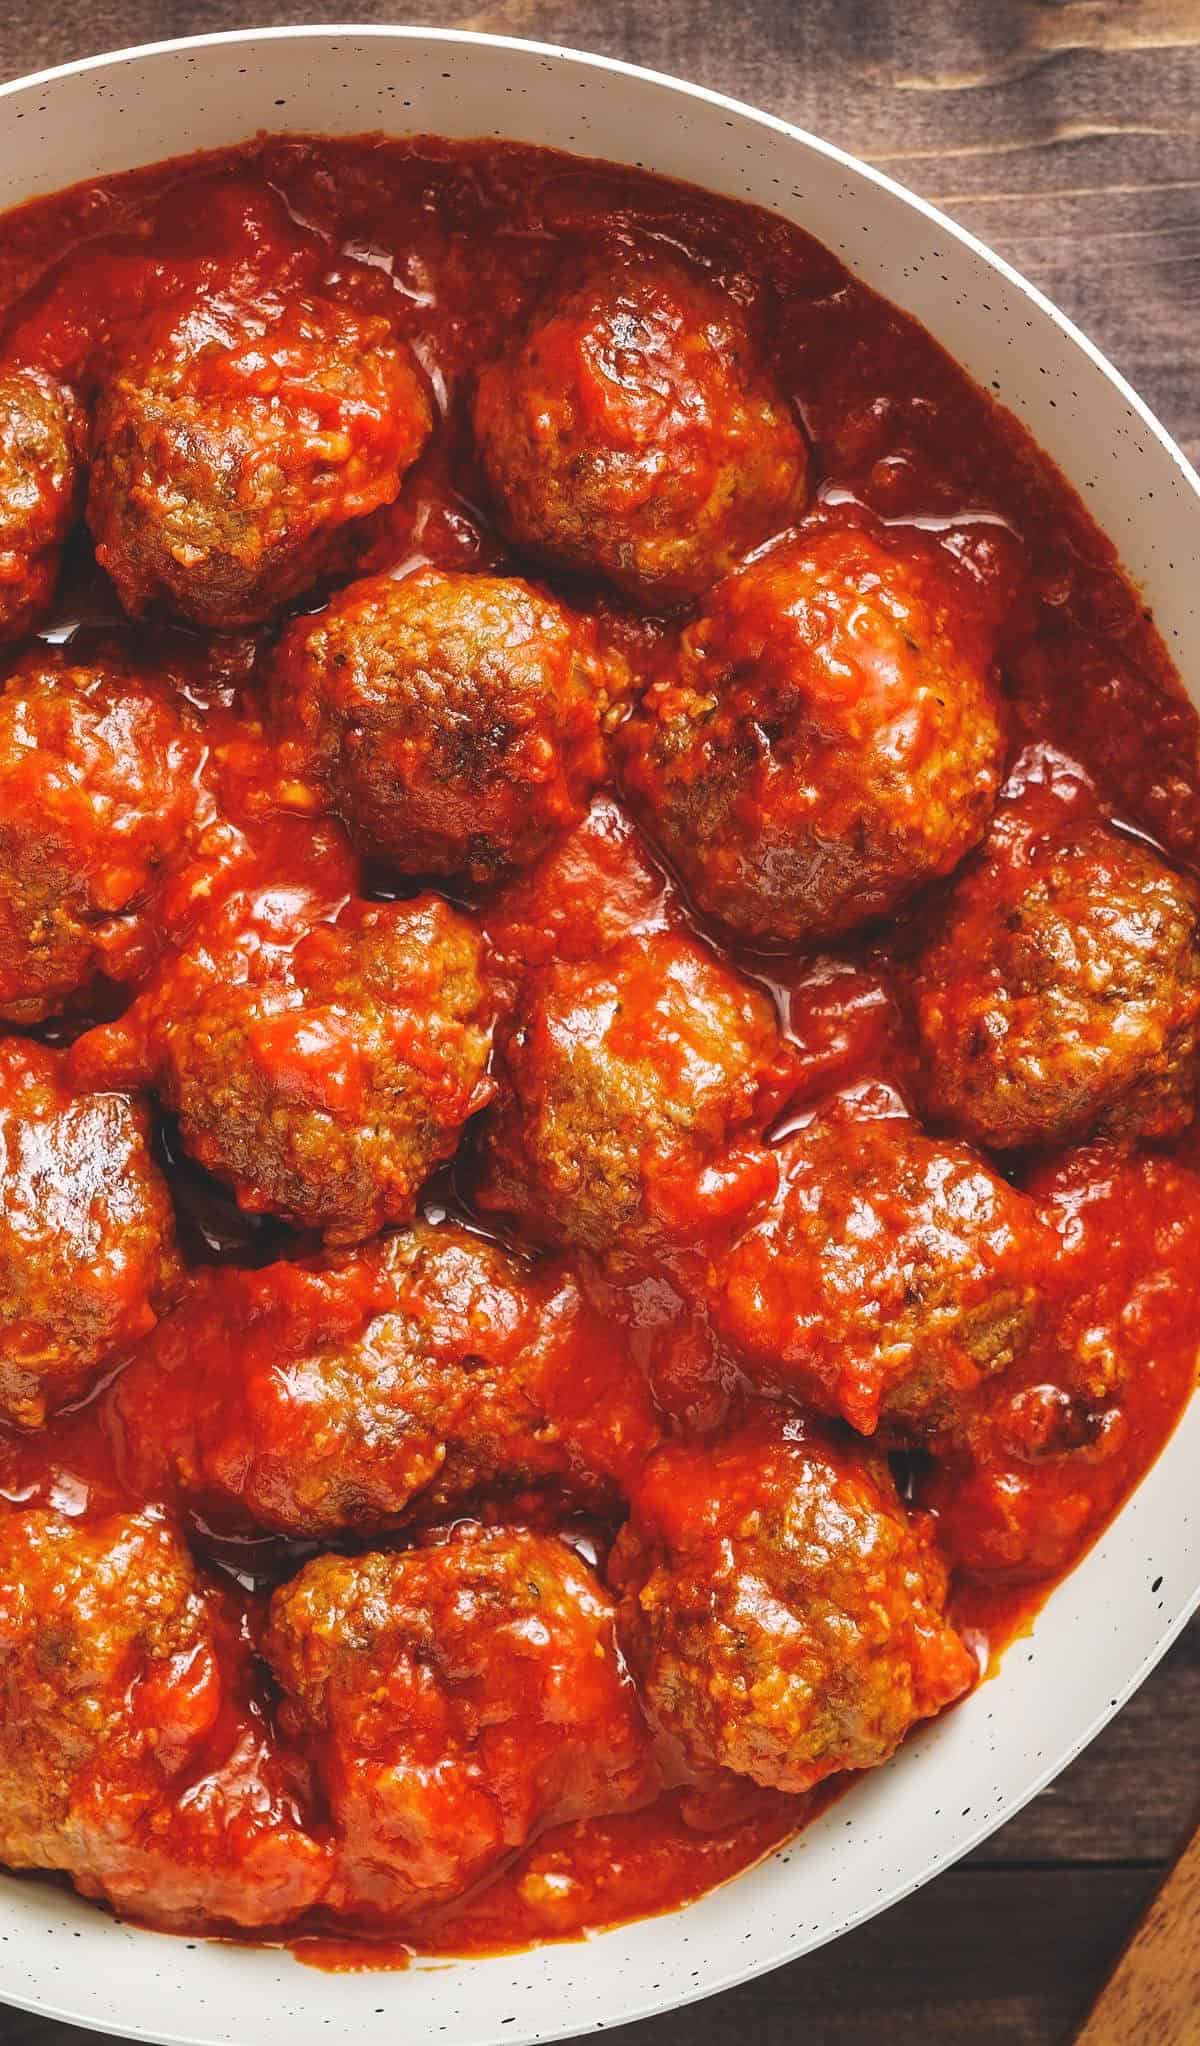  One bite of these delicious turkey meatballs and you'll be hooked - are you drooling yet?